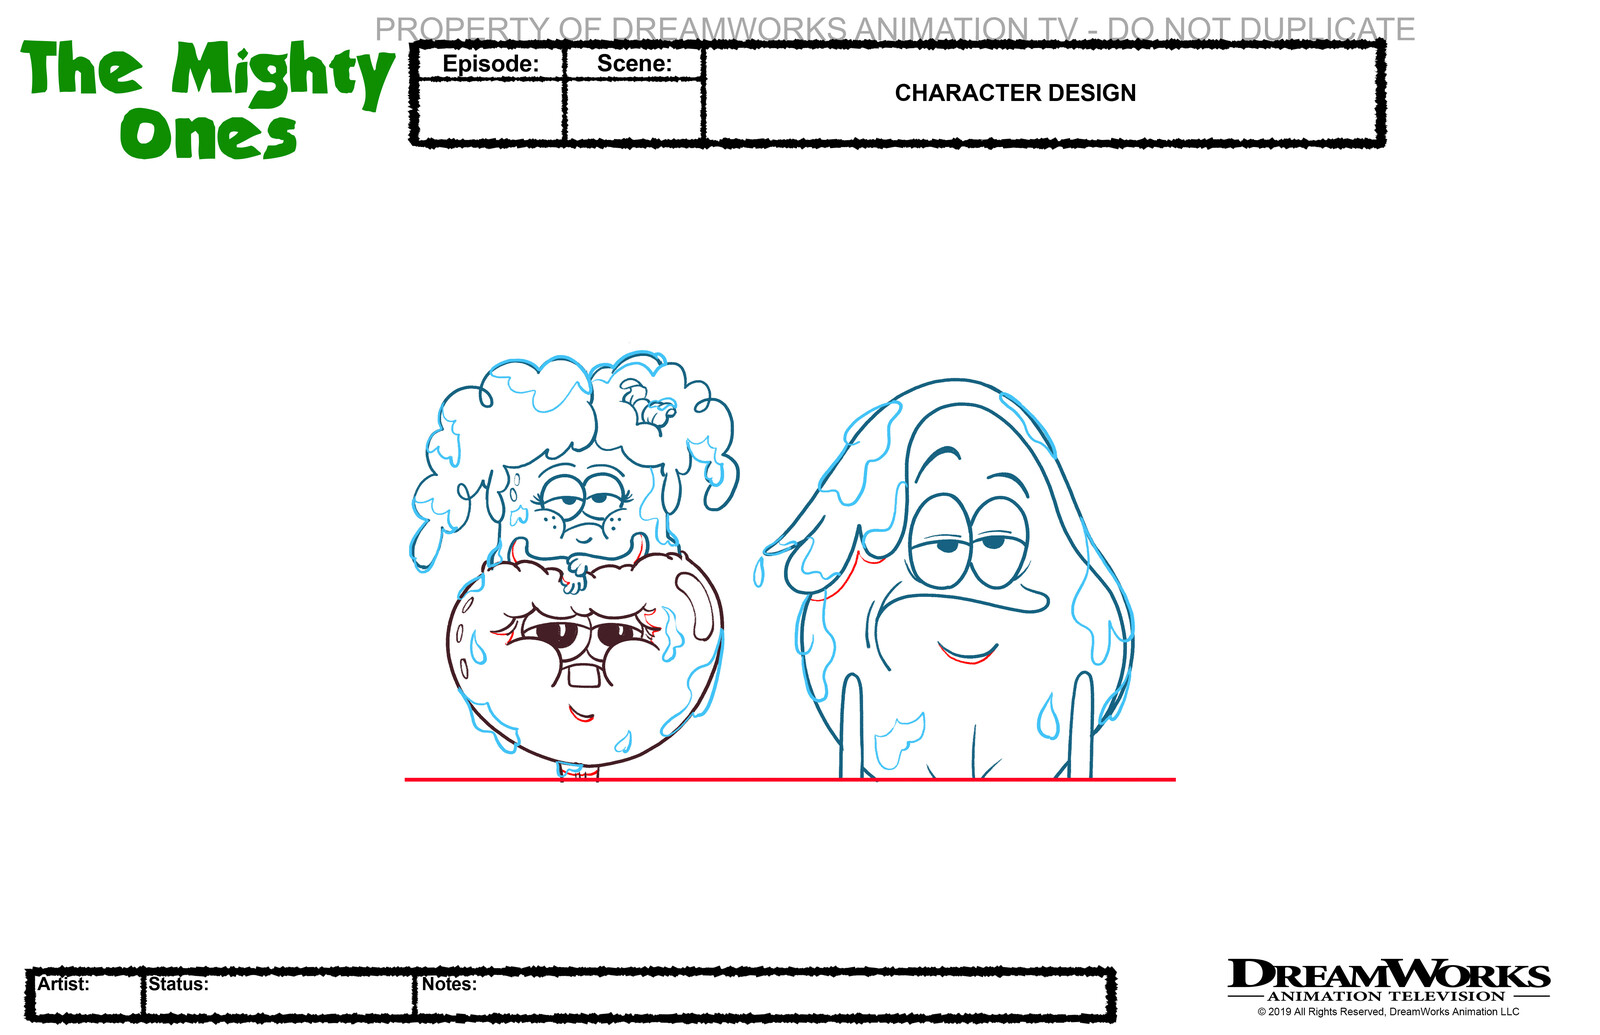 Dreamworks - The Mighty Ones - Character Design